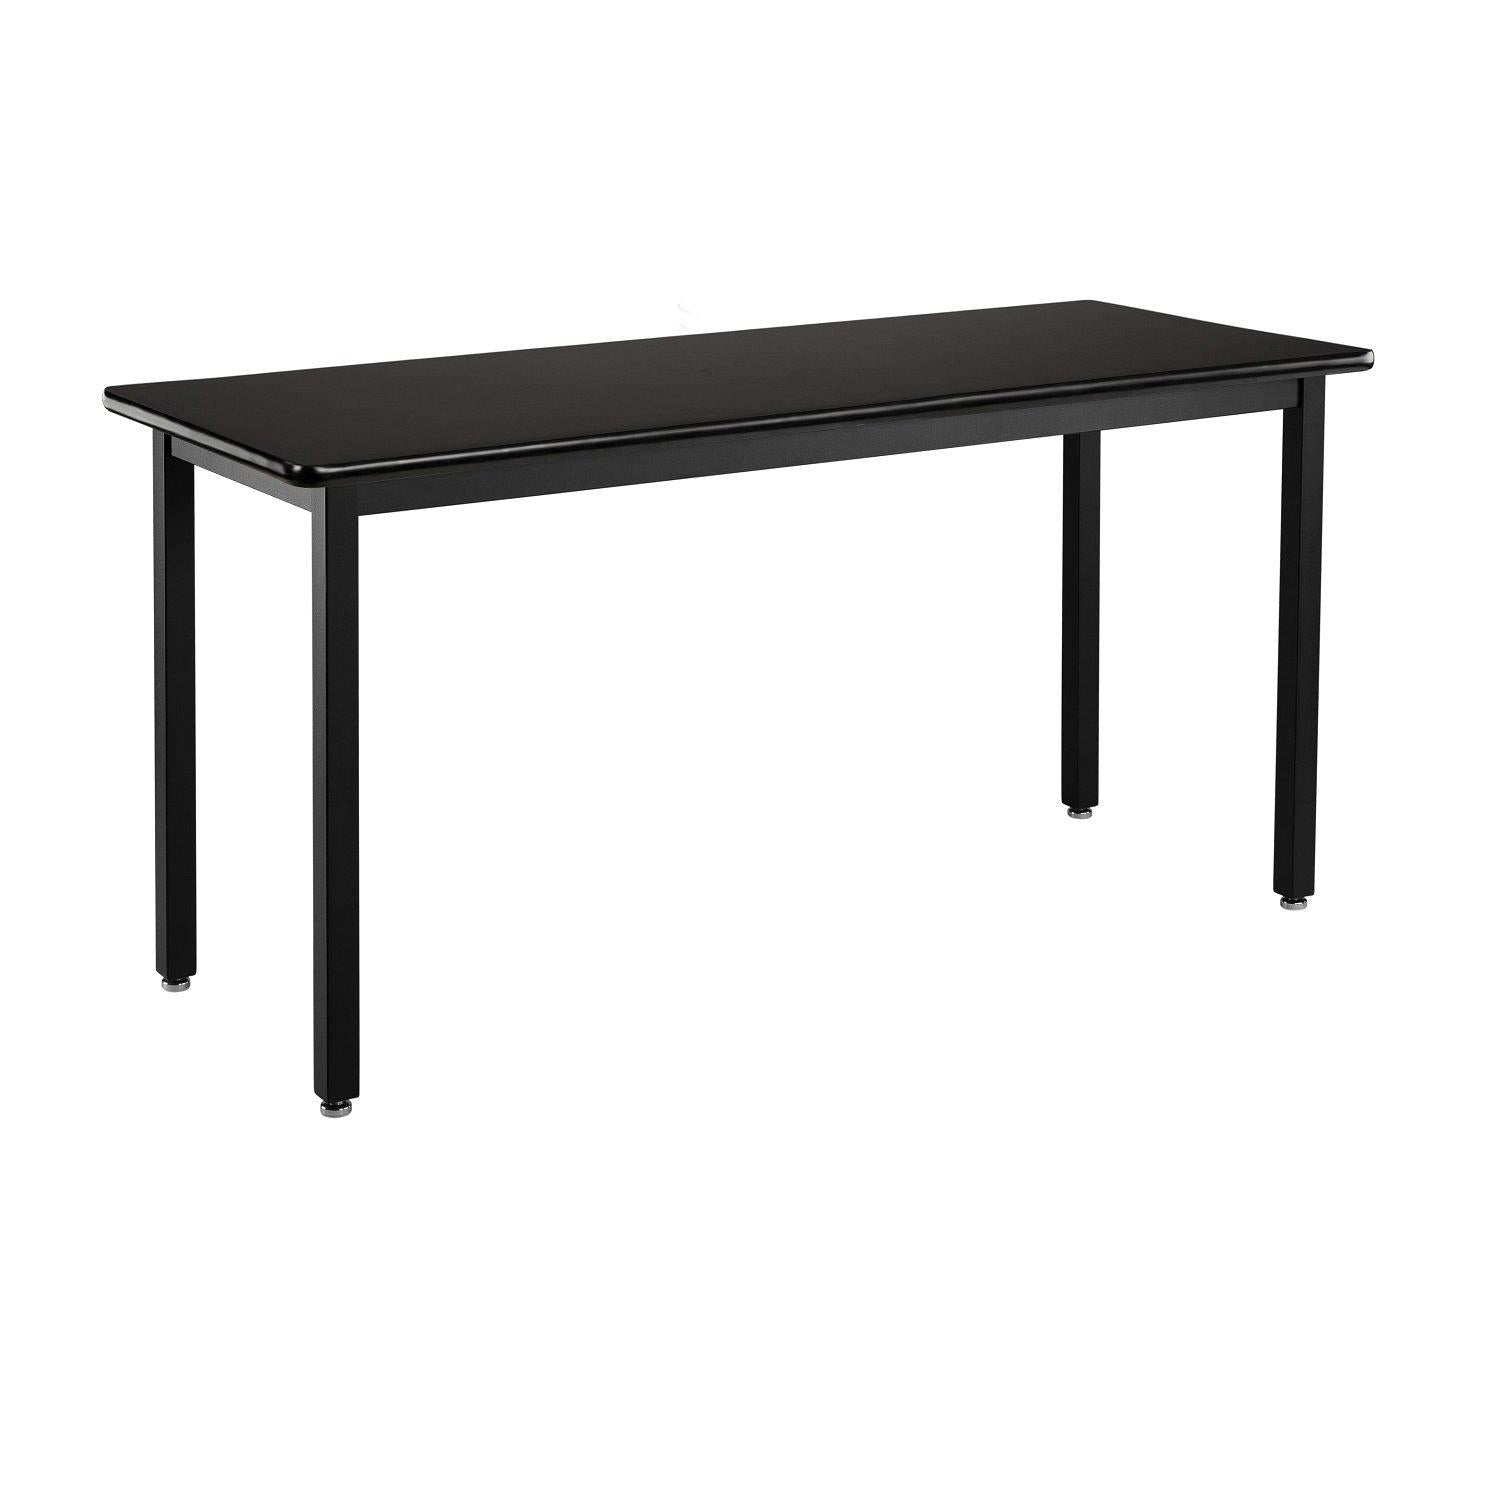 Heavy-Duty Fixed Height Utility Table, Black Frame, 30" x 60", High-Pressure Laminate Top with T-Mold Edge